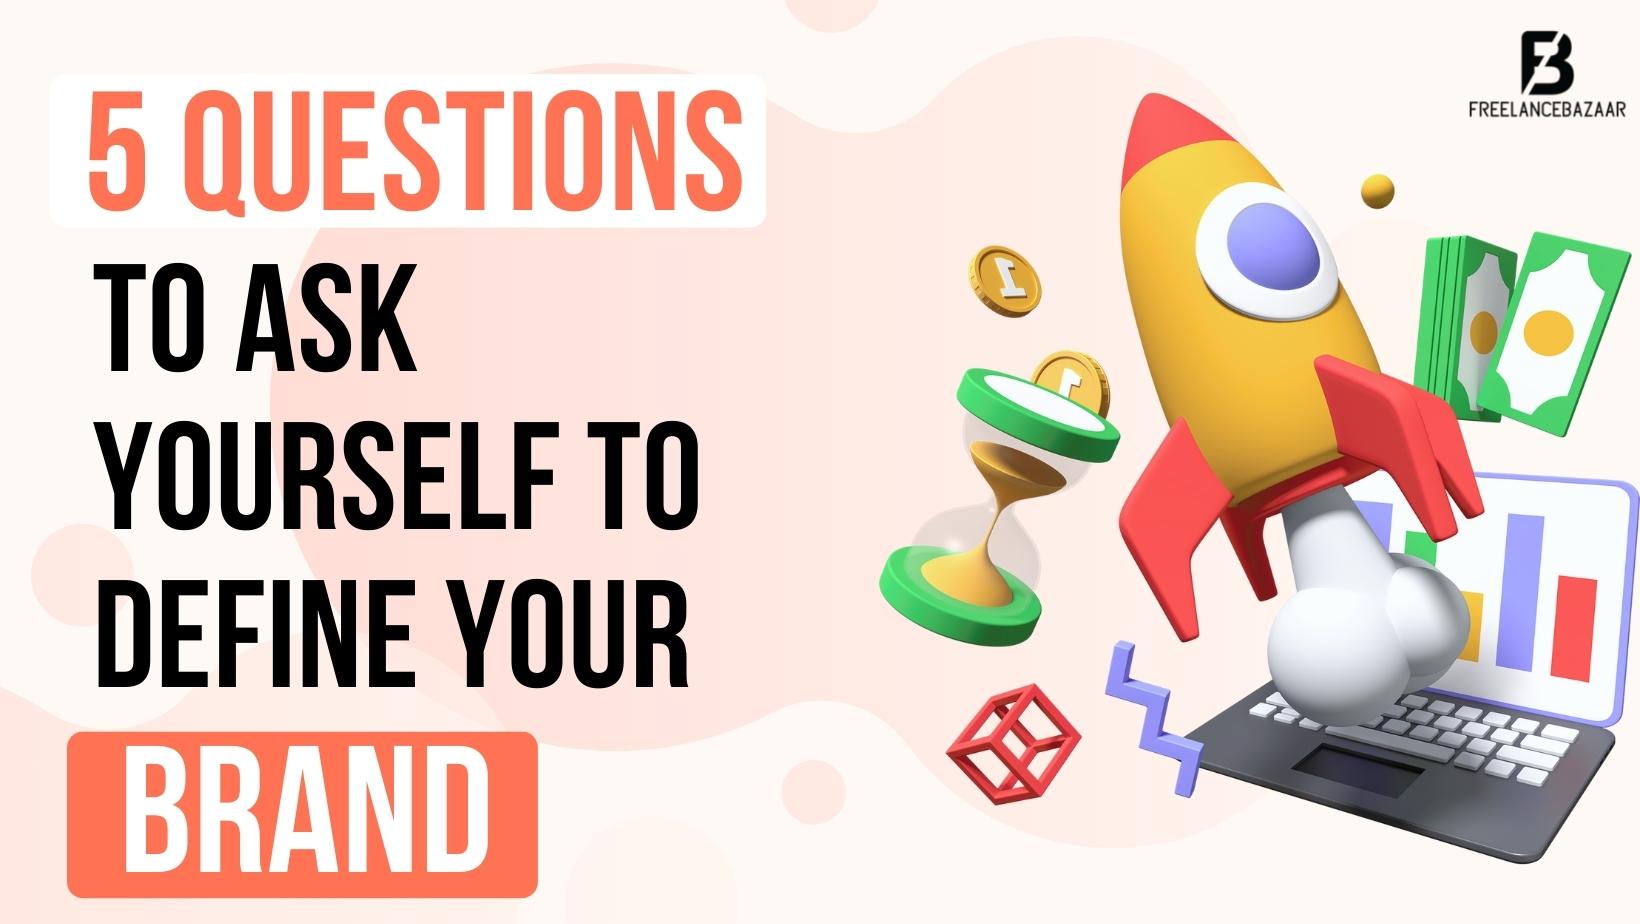 5 Questions to Ask Yourself to Define Your Brand